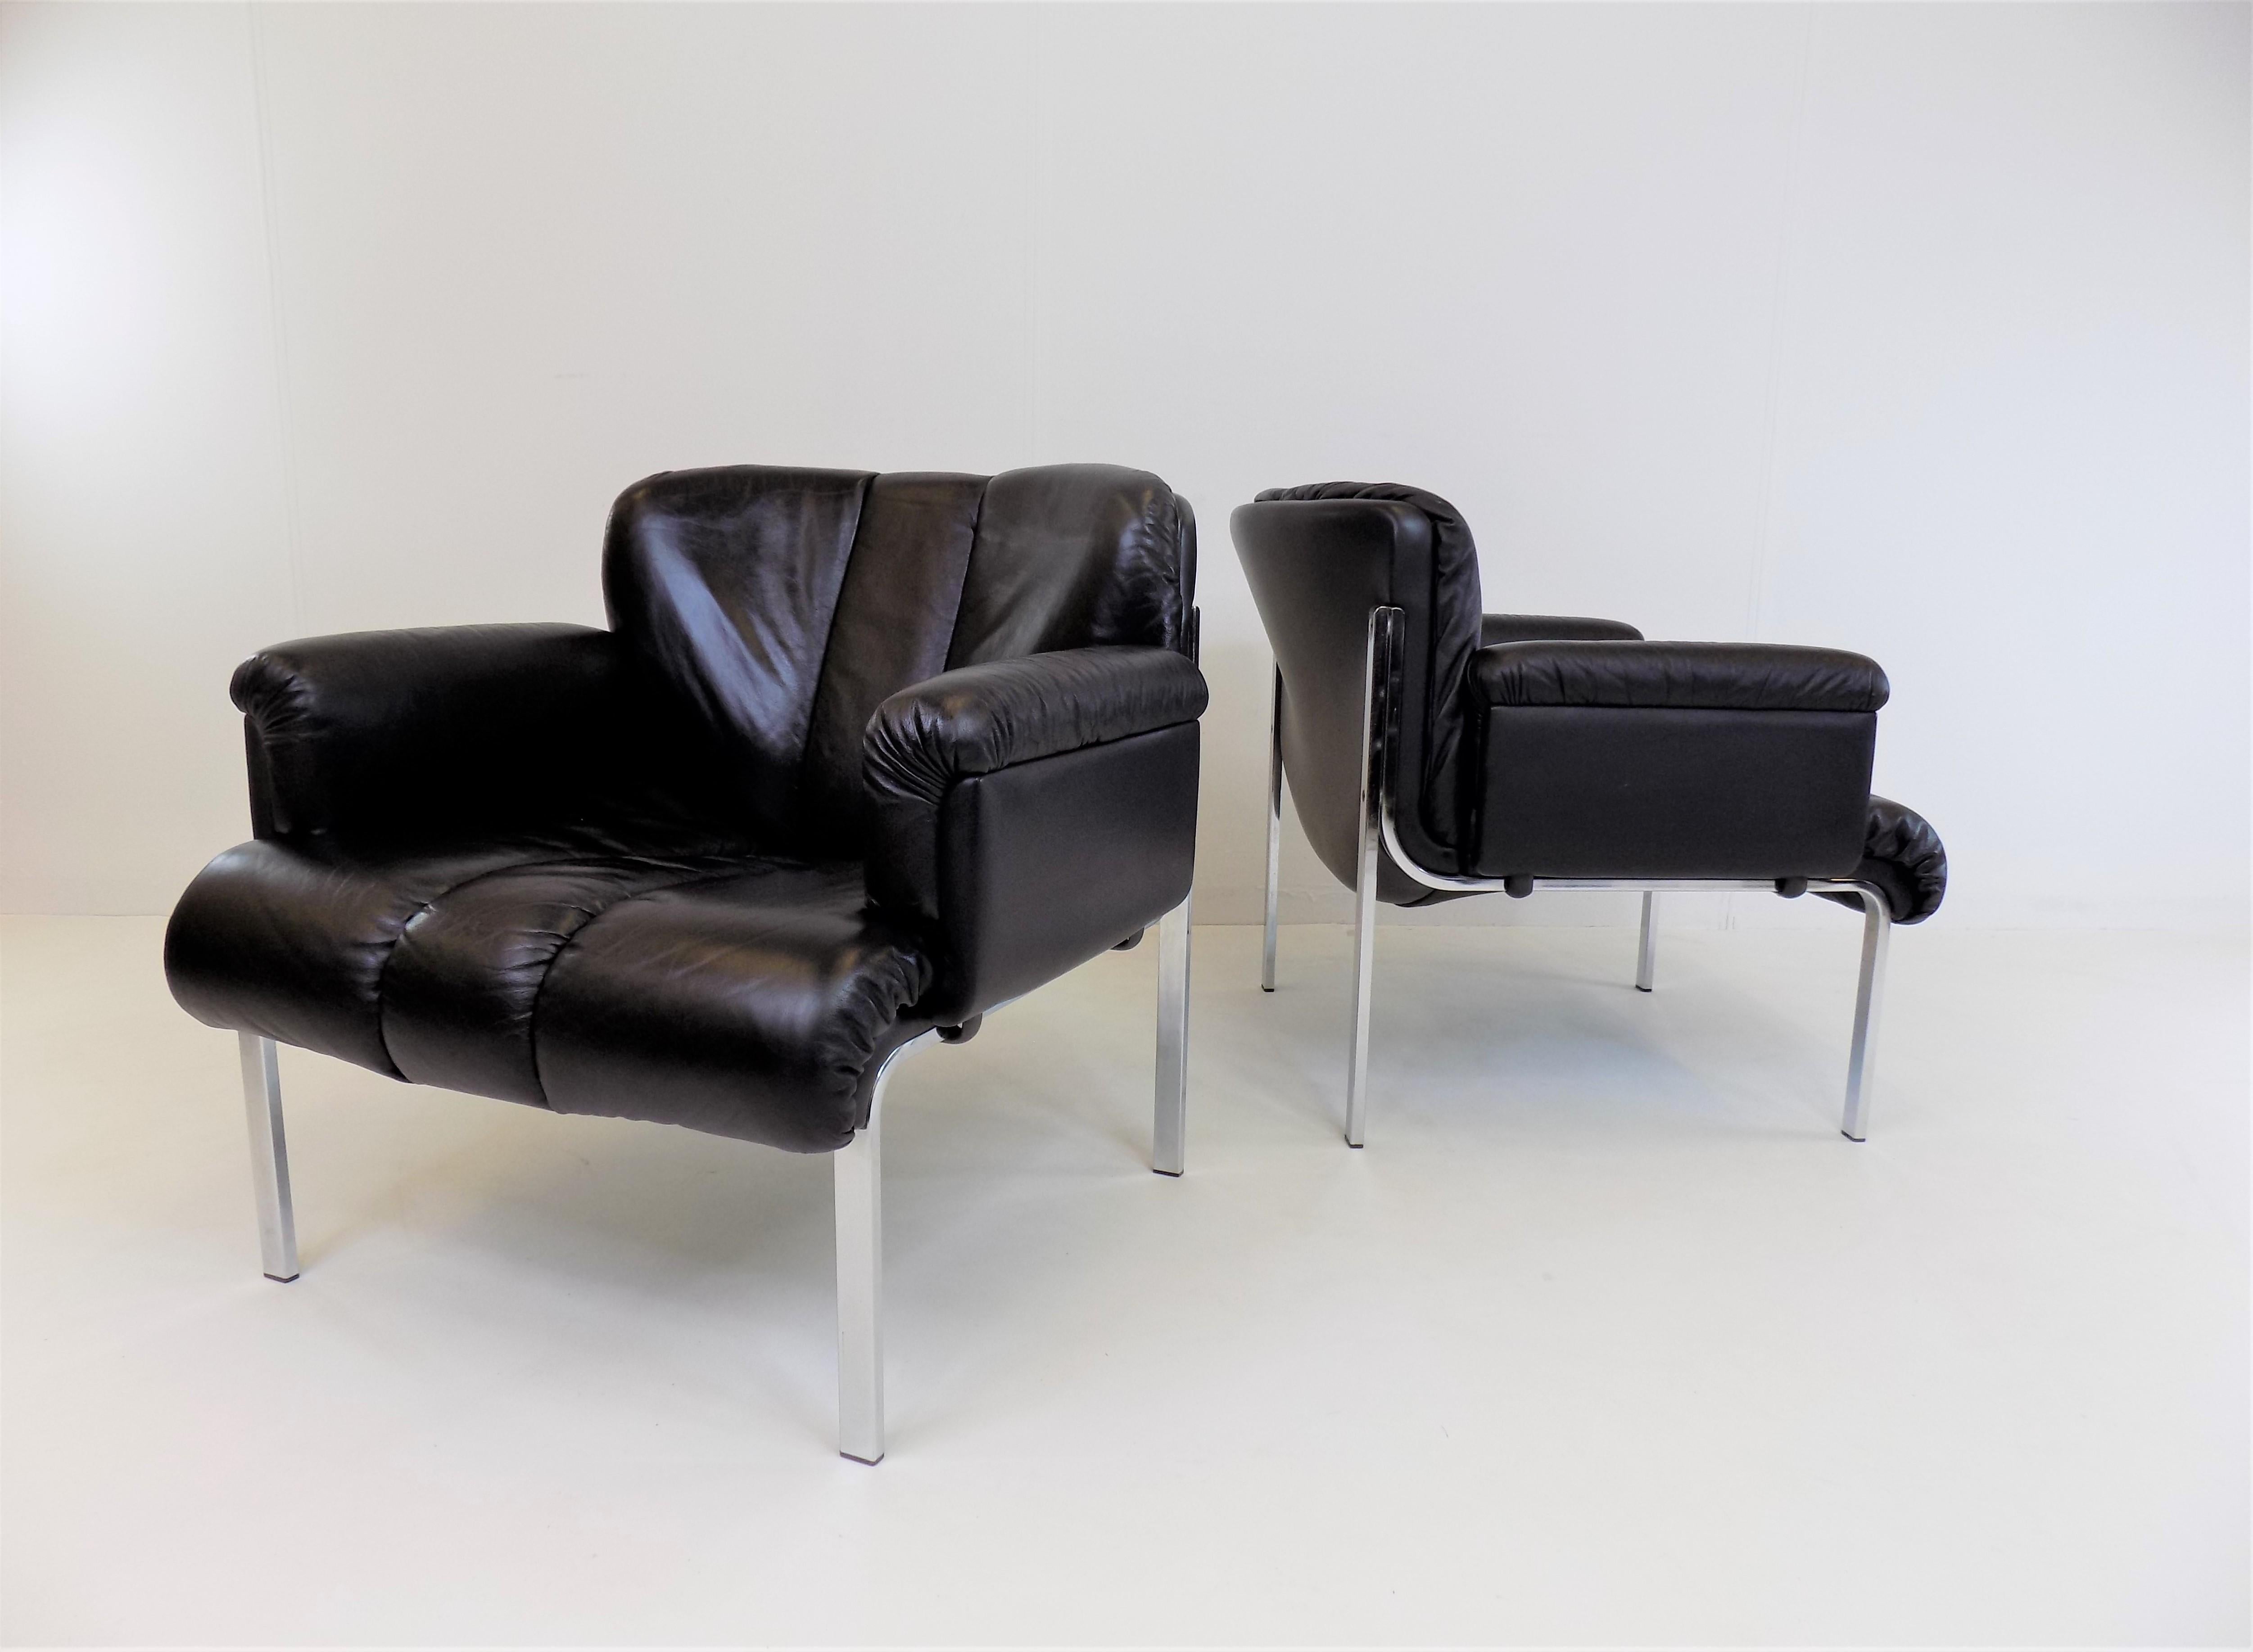 This set of 2 Girsberger Eurochairs in black leather is in almost new condition. The leather is soft and shows hardly any signs of wear. The chrome frame of the armchair has its full shine and shows no damage. The Eurochair was designed by